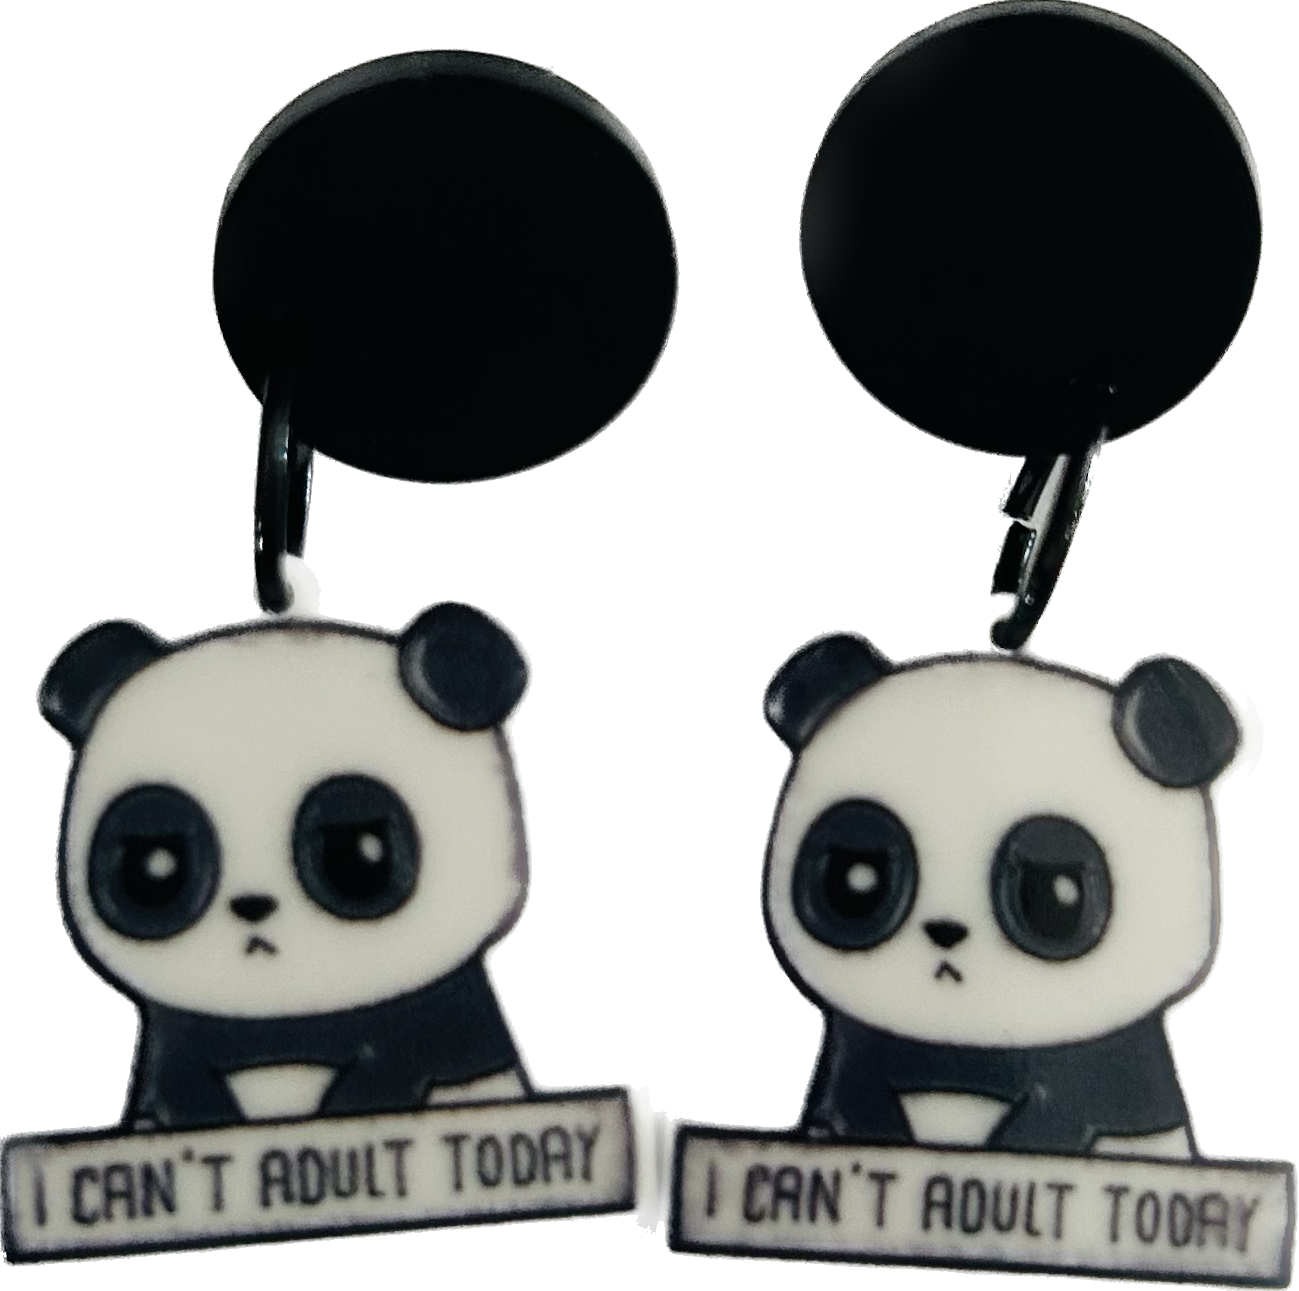 Panda earrings - I can’t adult today